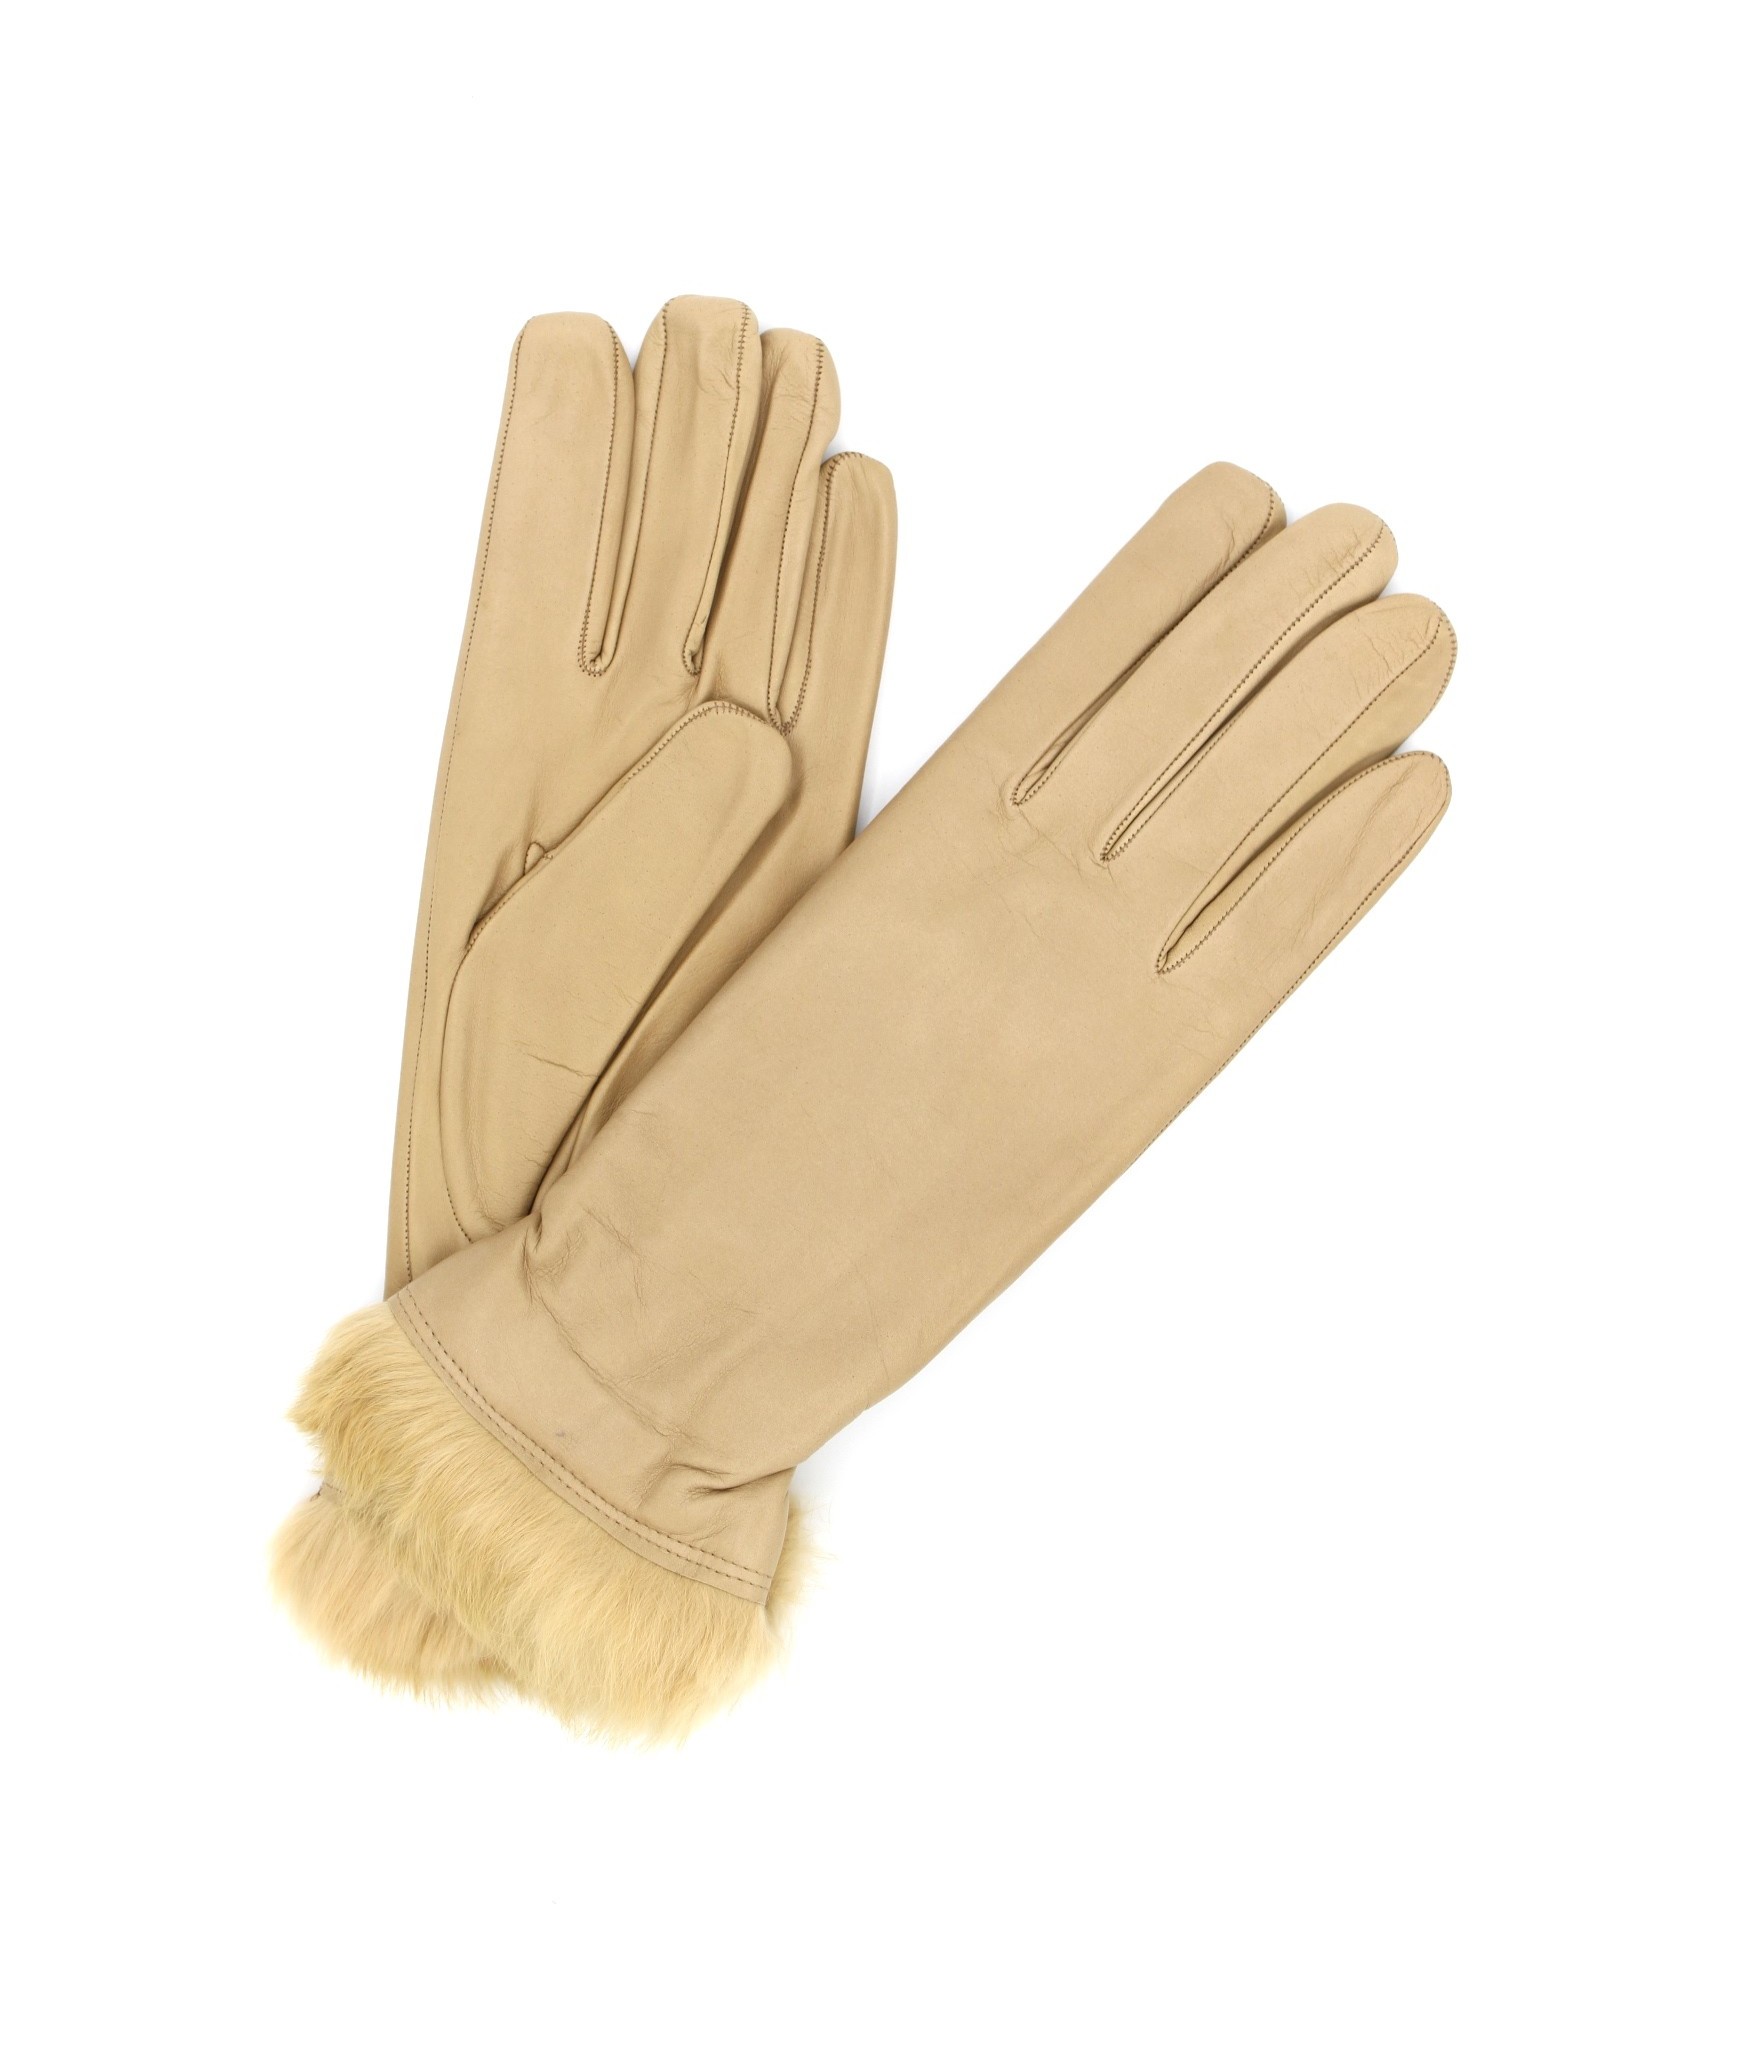 1036 Kid Leather Gloves Rabbit Fur Lined Beige/Taupe 